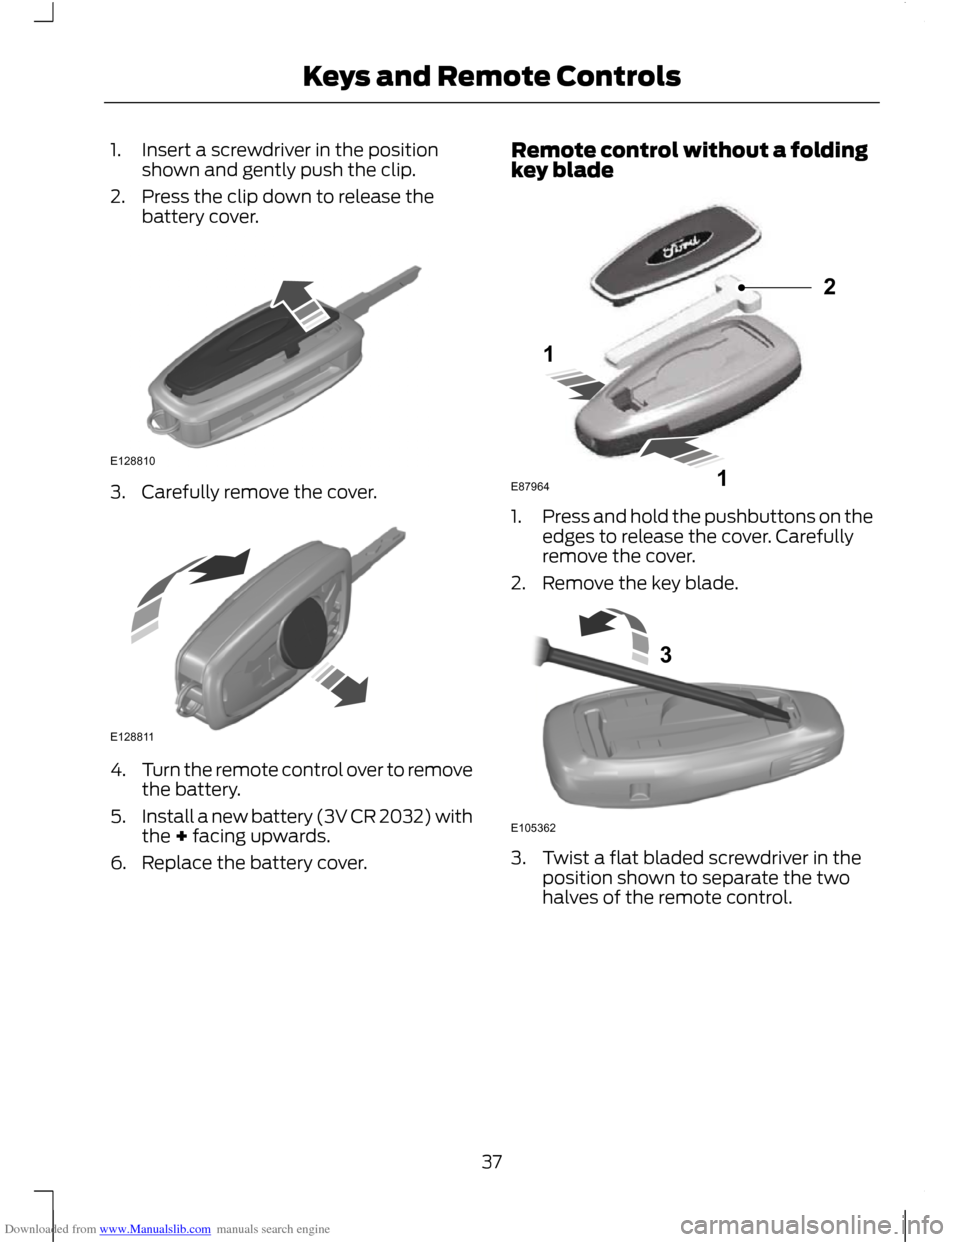 FORD C MAX 2011 2.G Owners Guide Downloaded from www.Manualslib.com manuals search engine 1. Insert a screwdriver in the position
shown and gently push the clip.
2. Press the clip down to release the battery cover. 3. Carefully remov